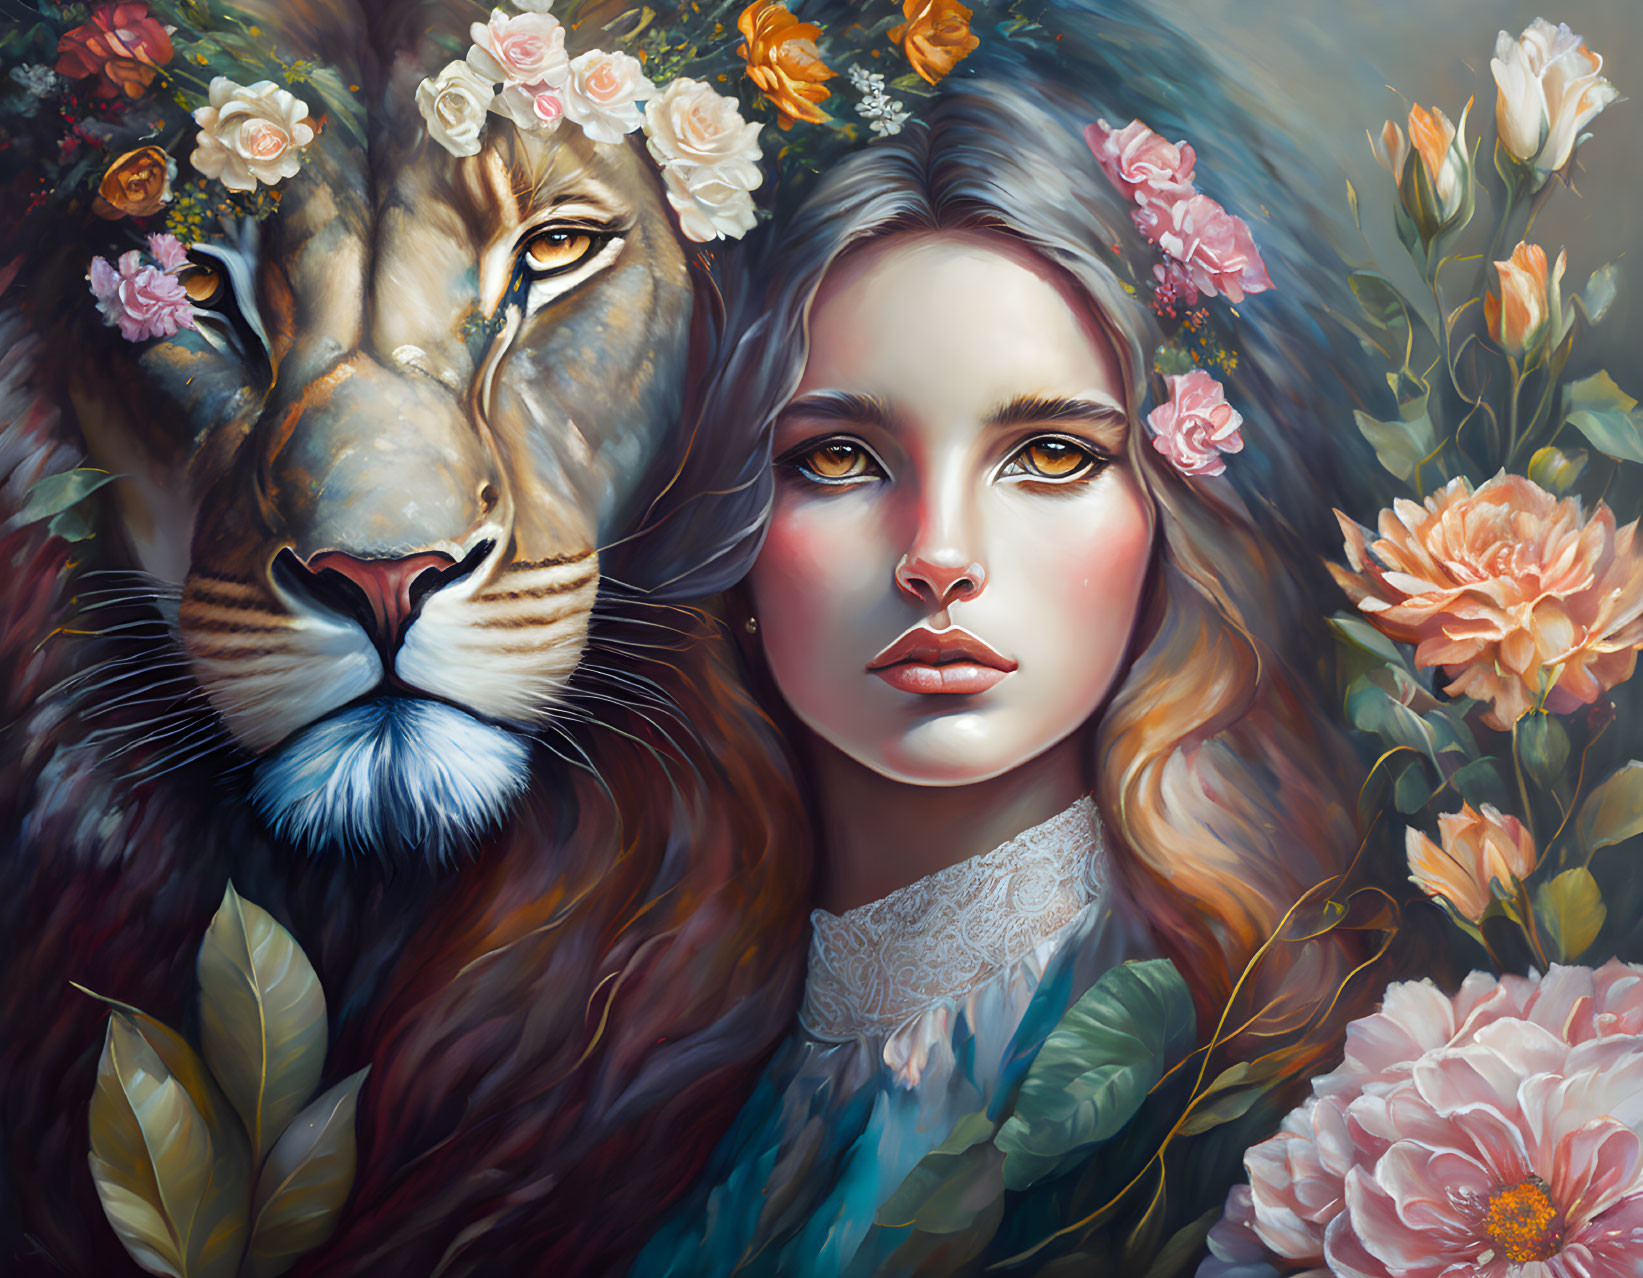 Surreal portrait of woman with lion's mane in vibrant floral setting